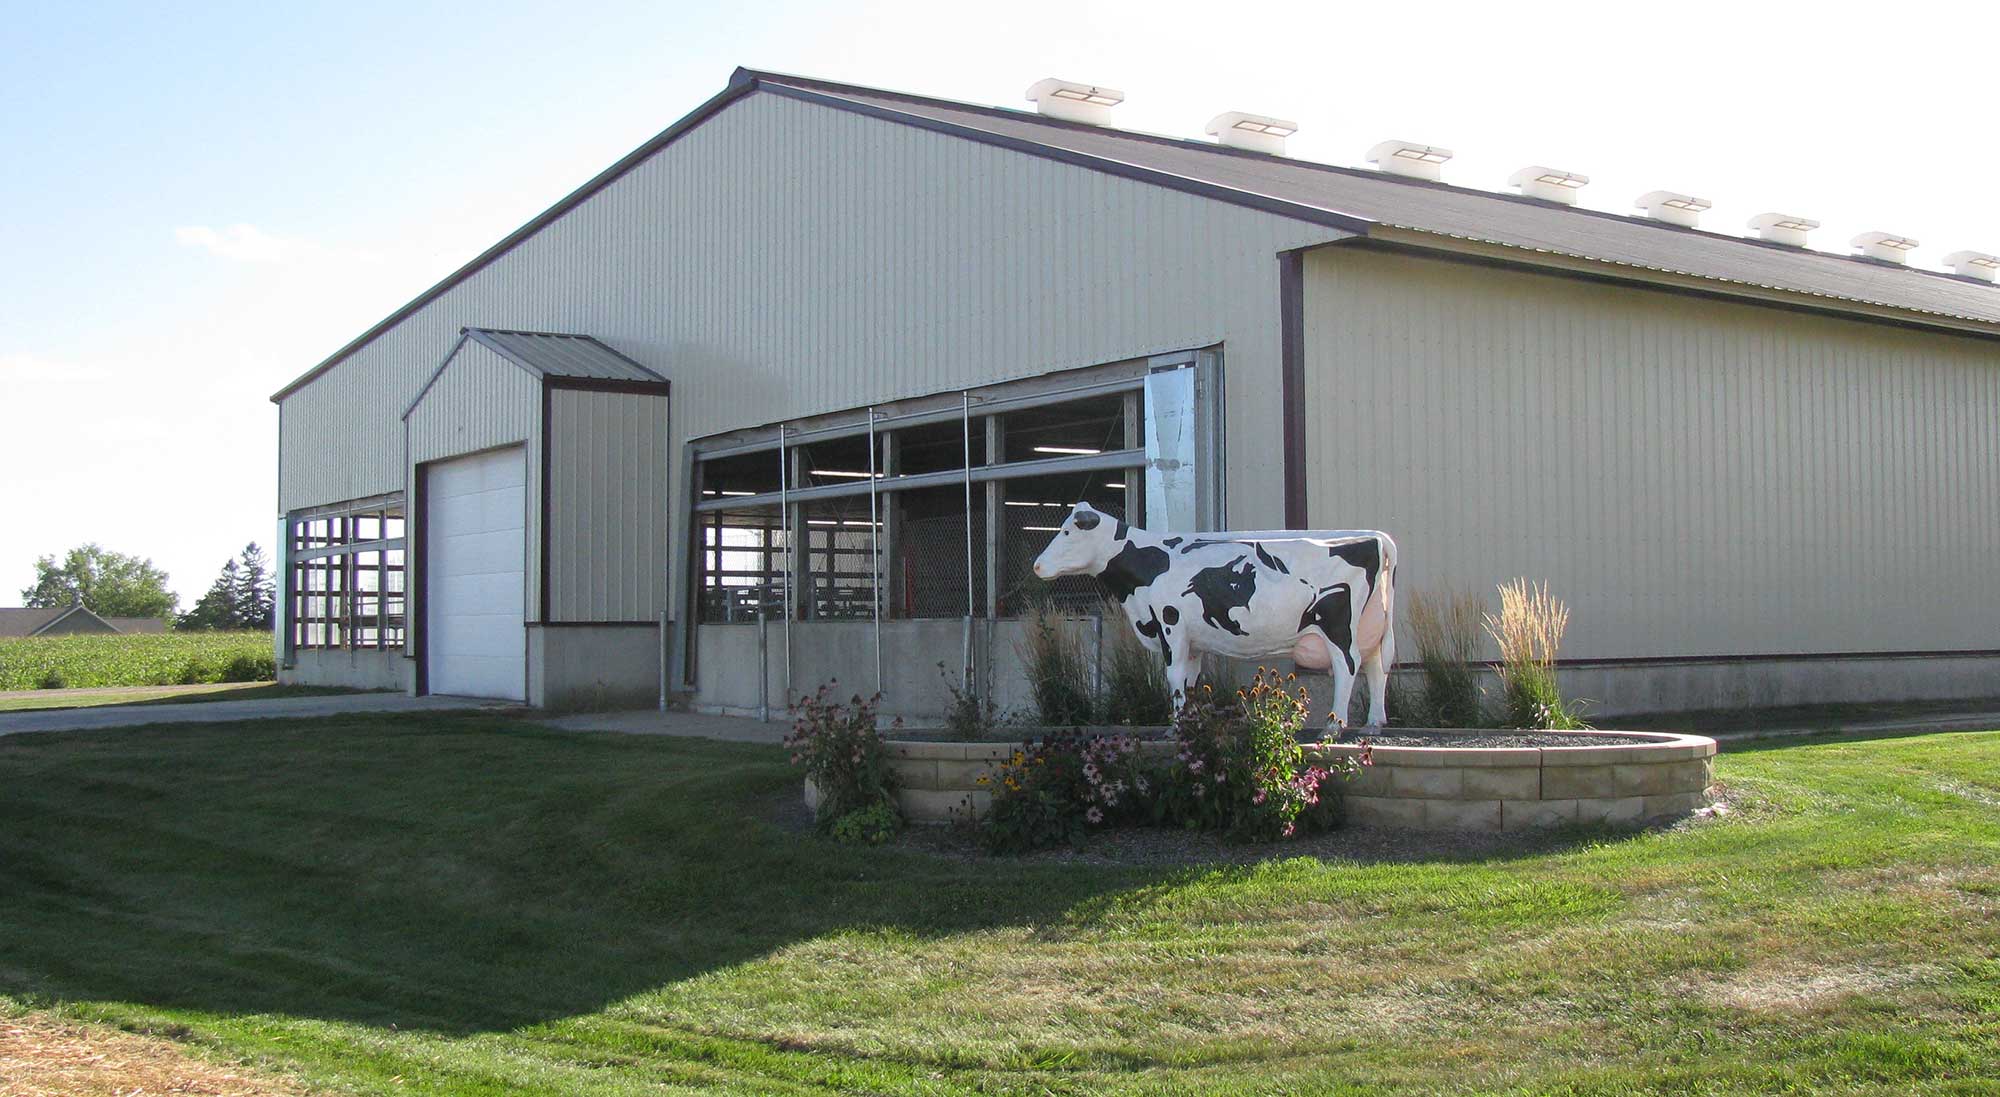 A statue of a dairy cow on a landscaped terrace in front of a long dairy barn.